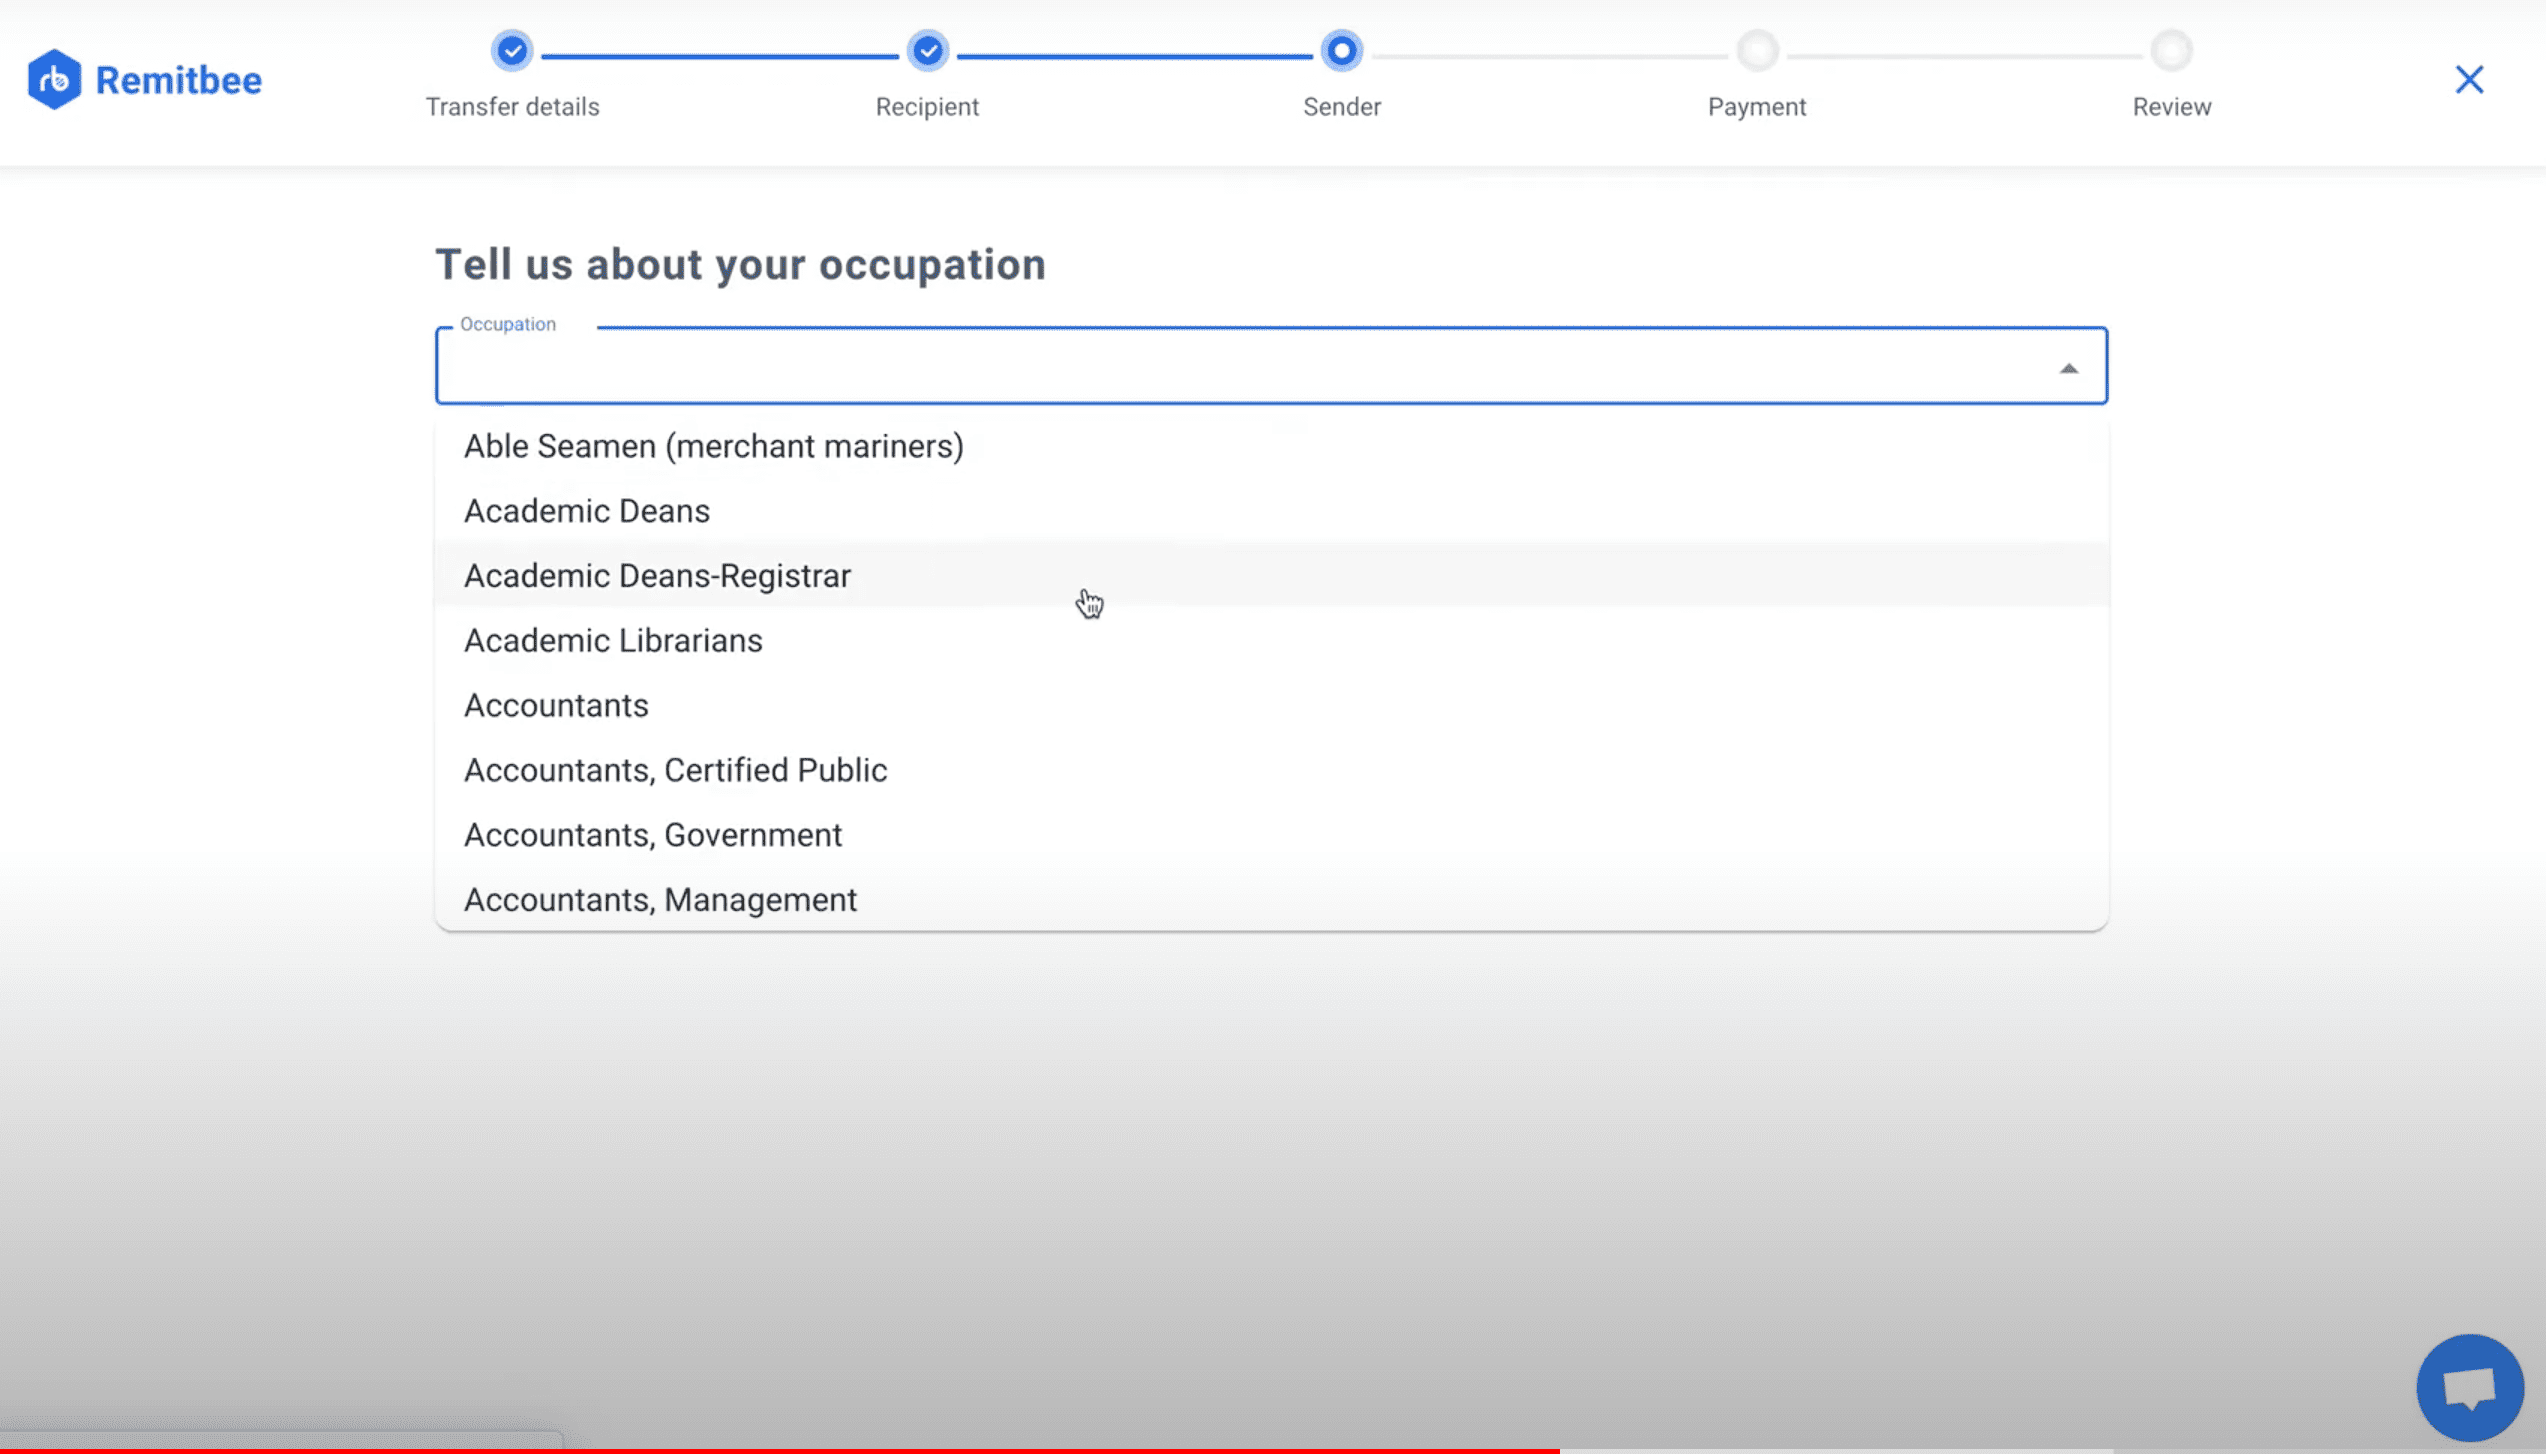 Select your occupation and industry